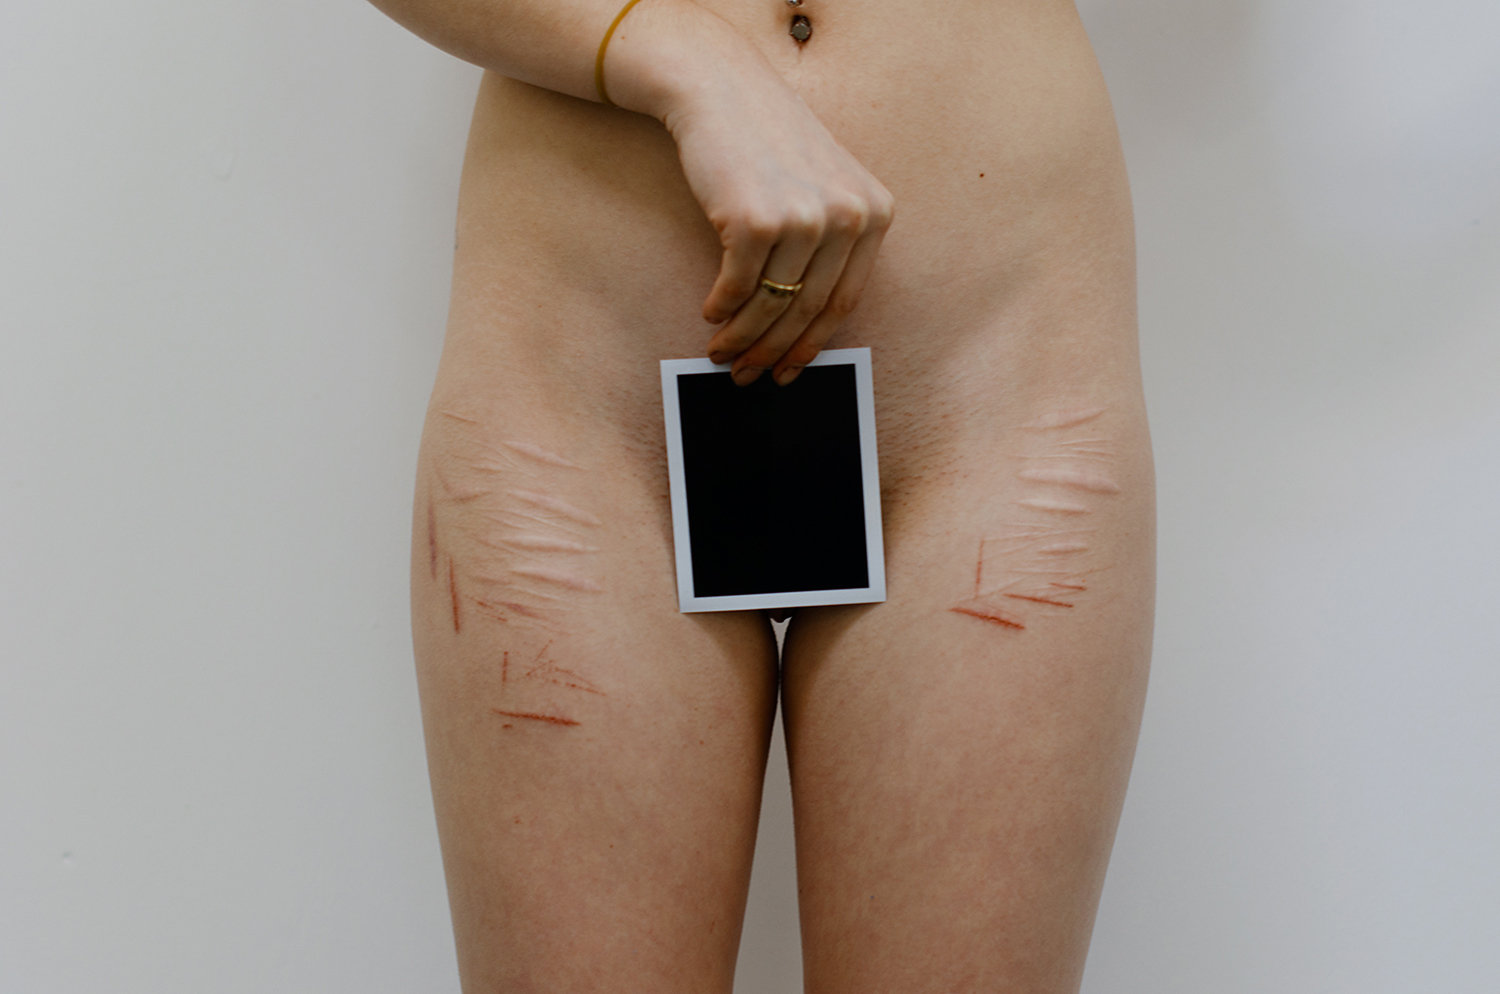 scars, nude model, escape the traumatic memories, photo by headcleaner